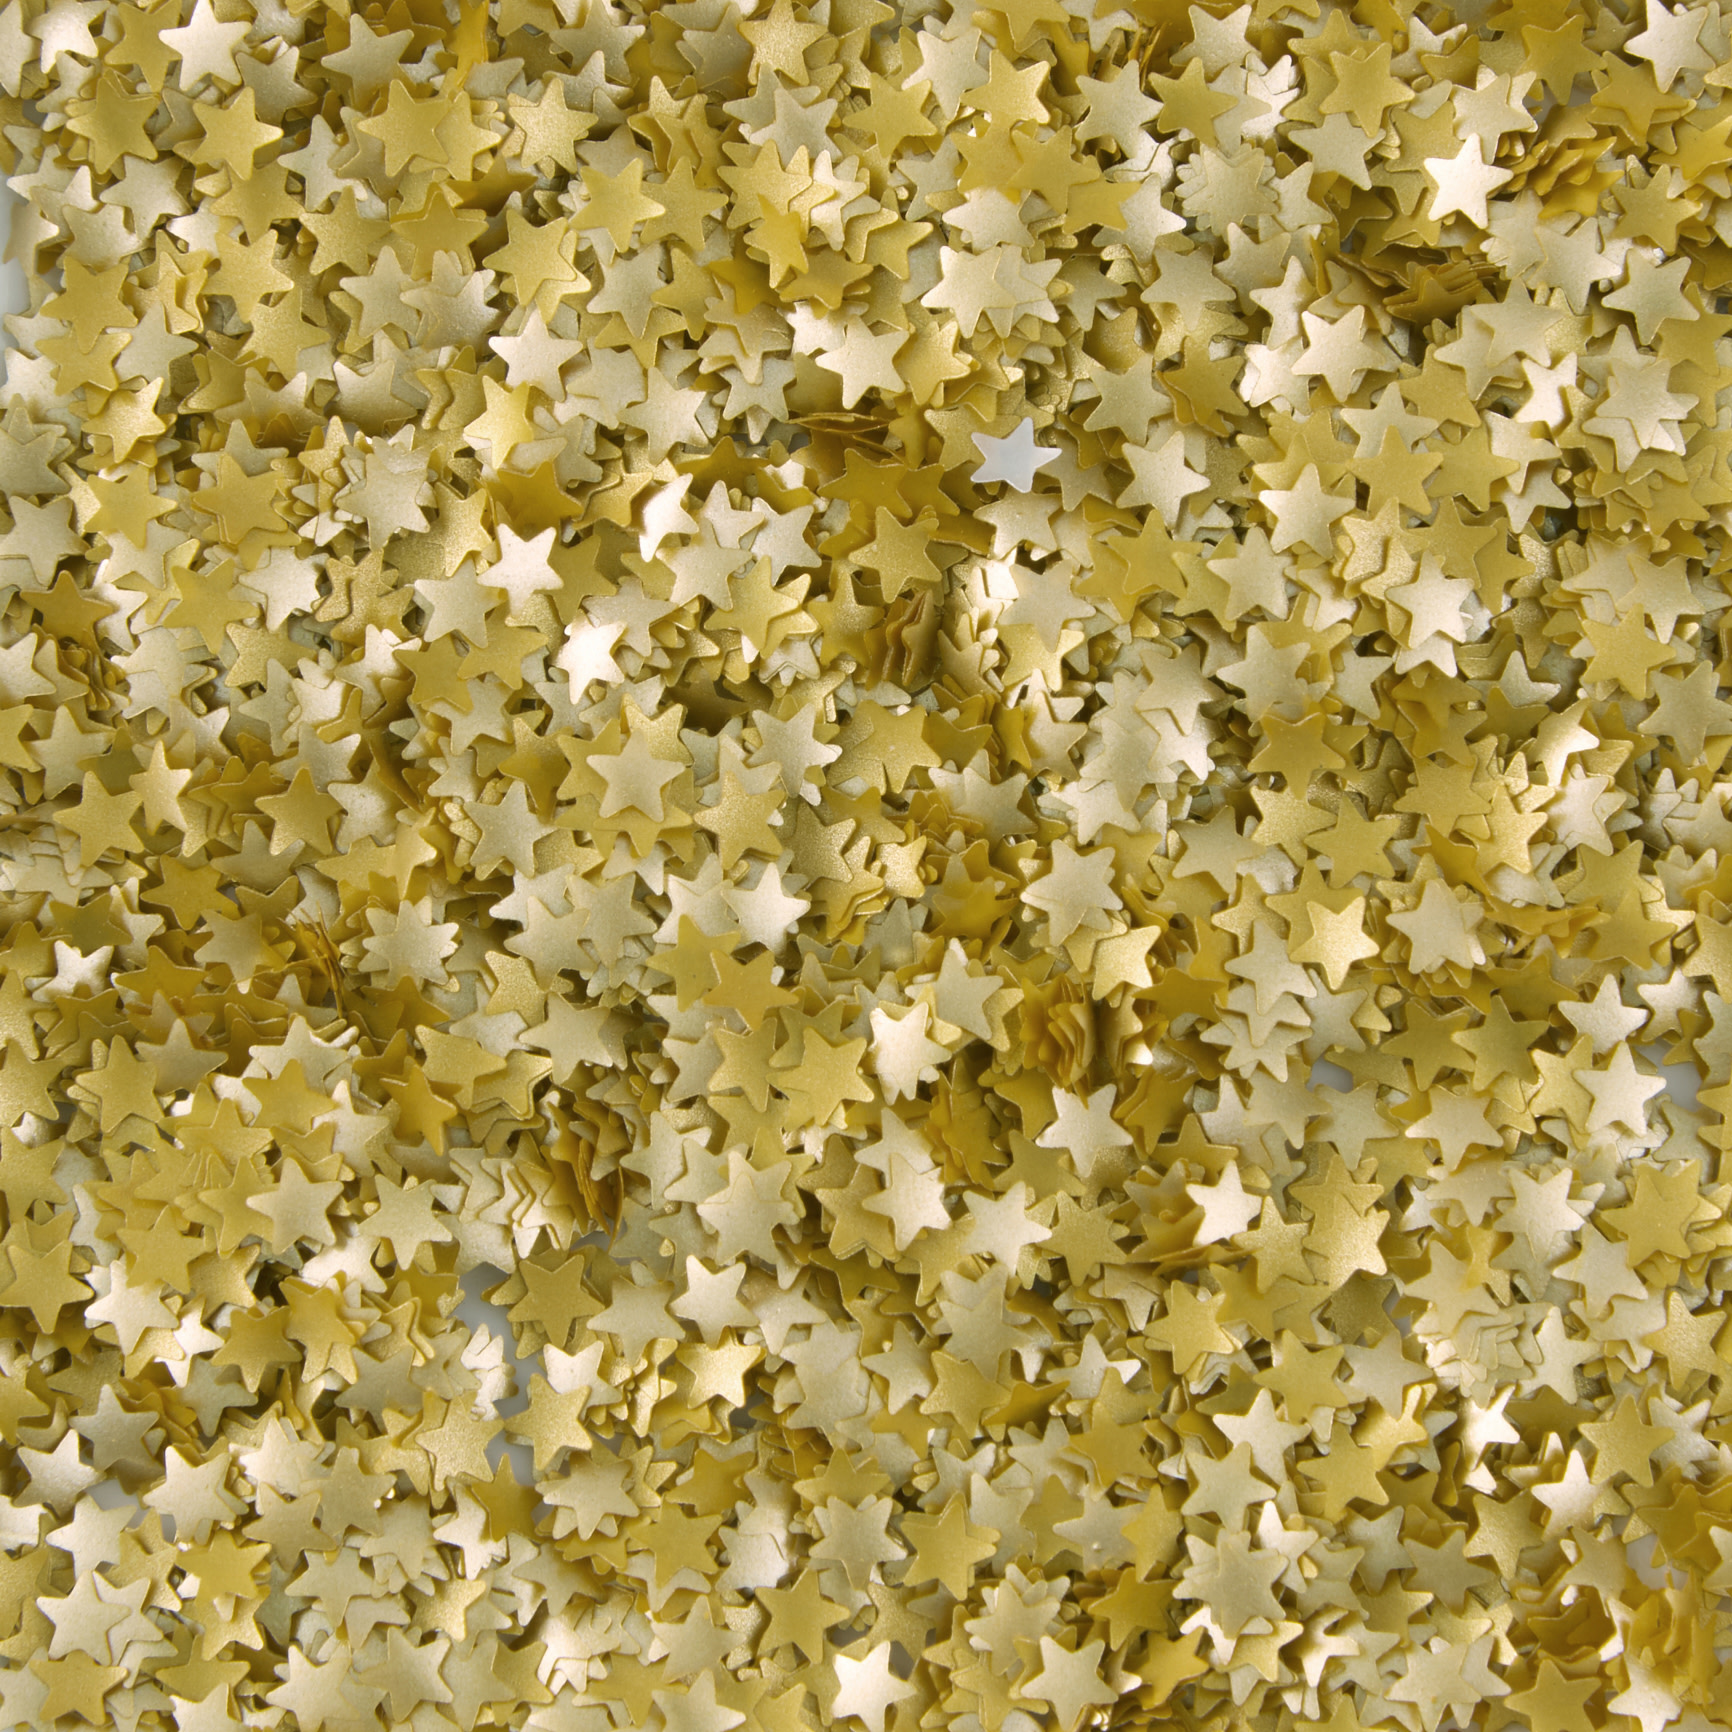 Wilton Gold Stars Edible Accents - image 2 of 9